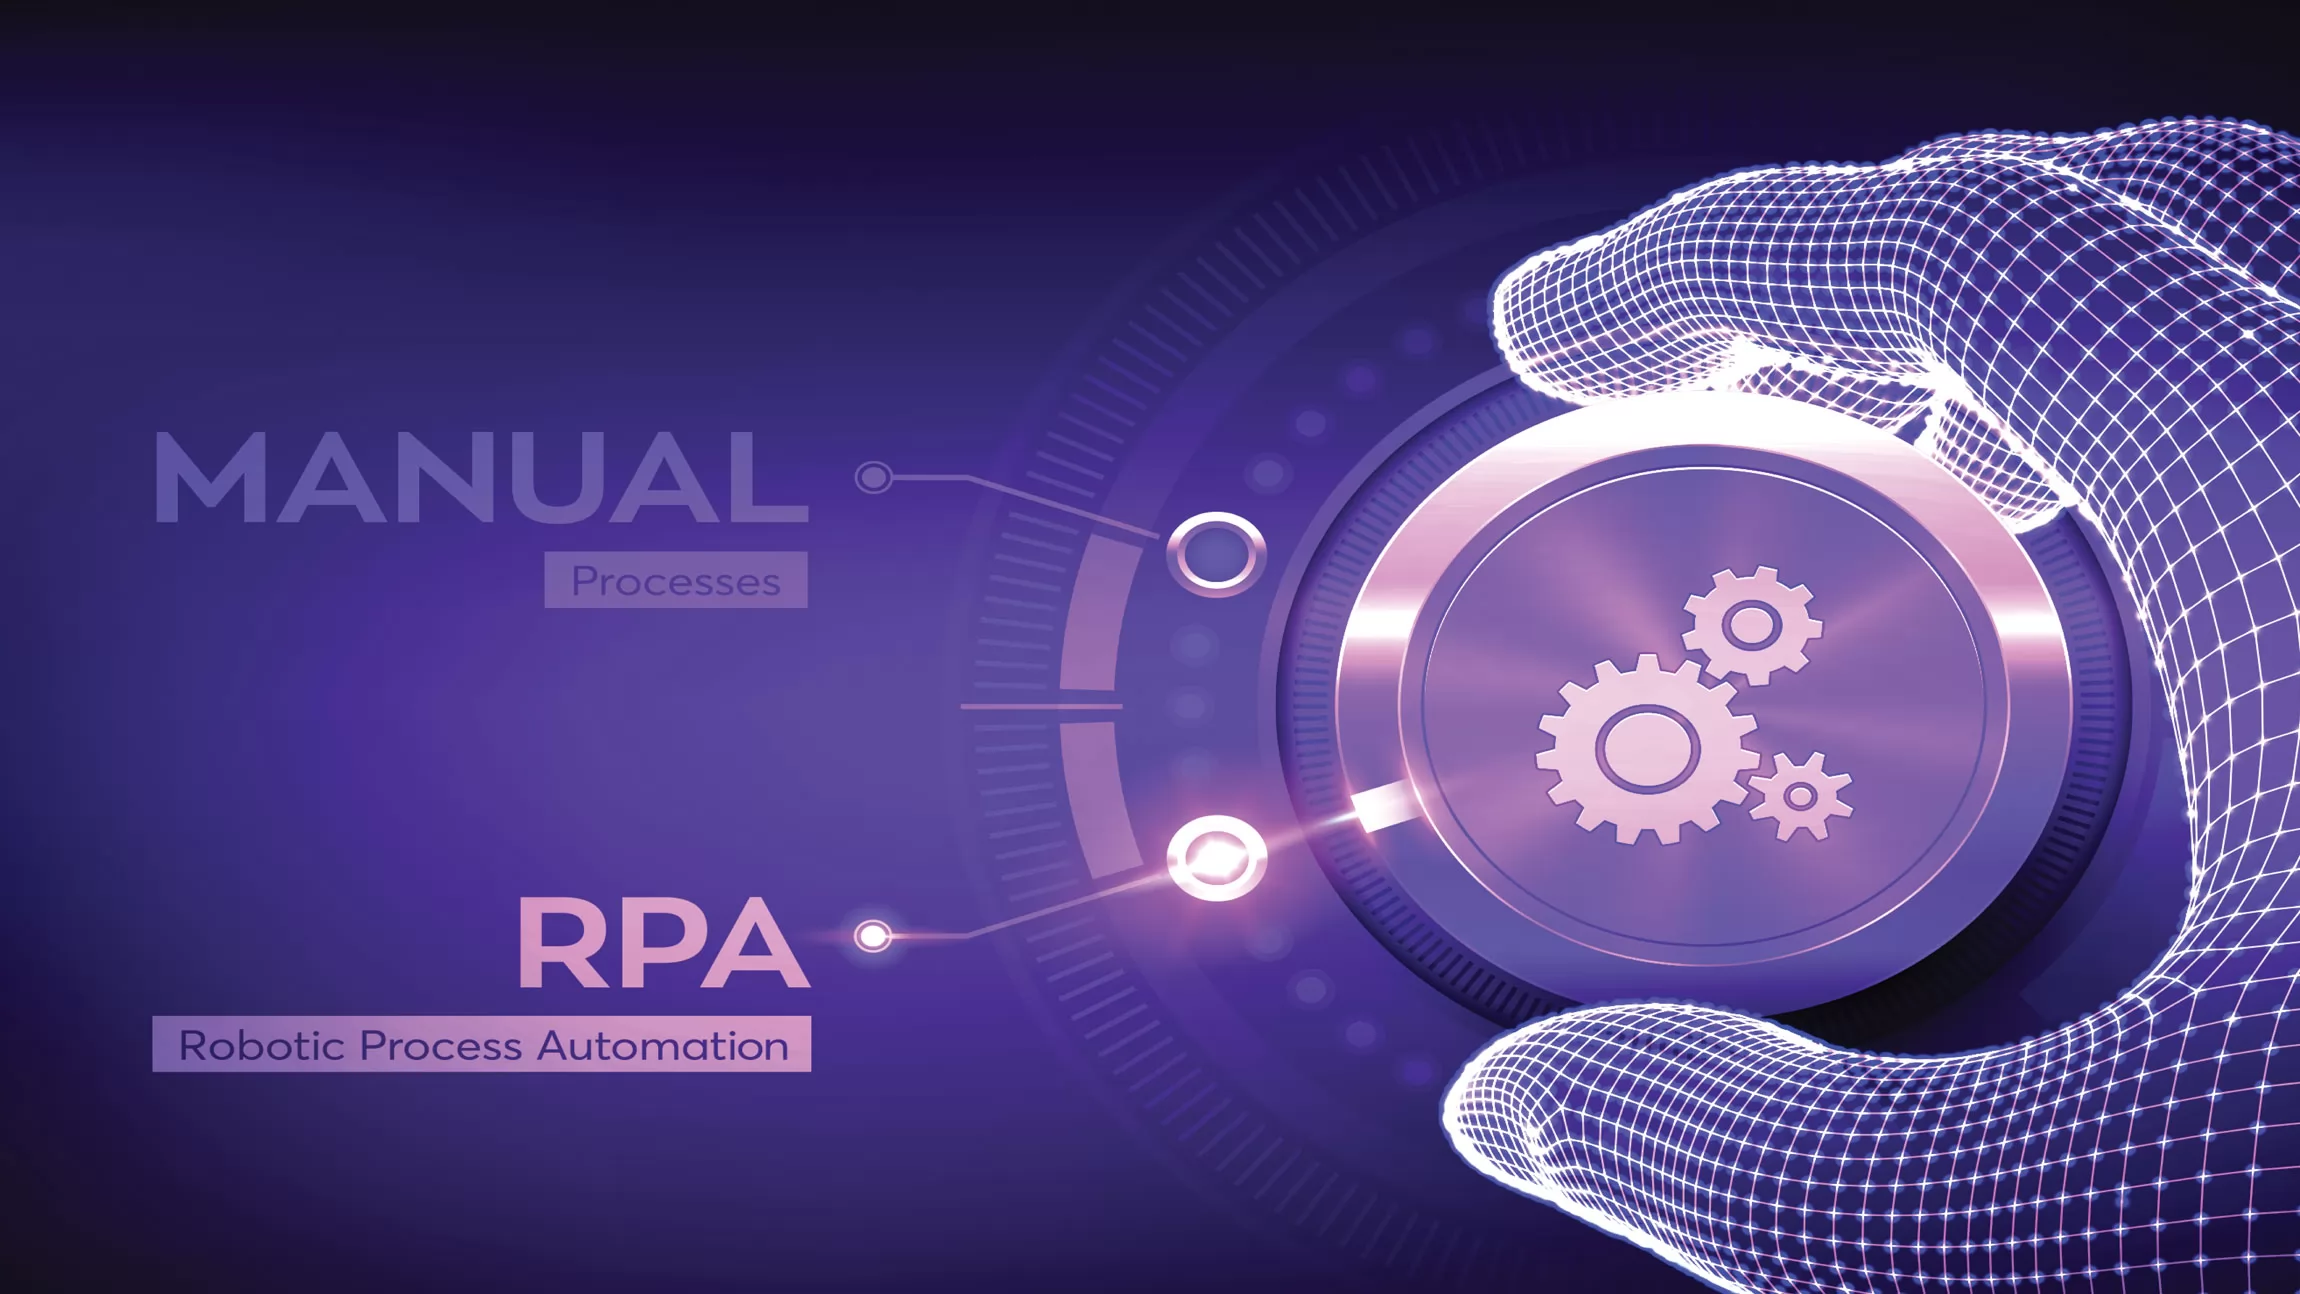 How to determine if your company needs to invest in RPA